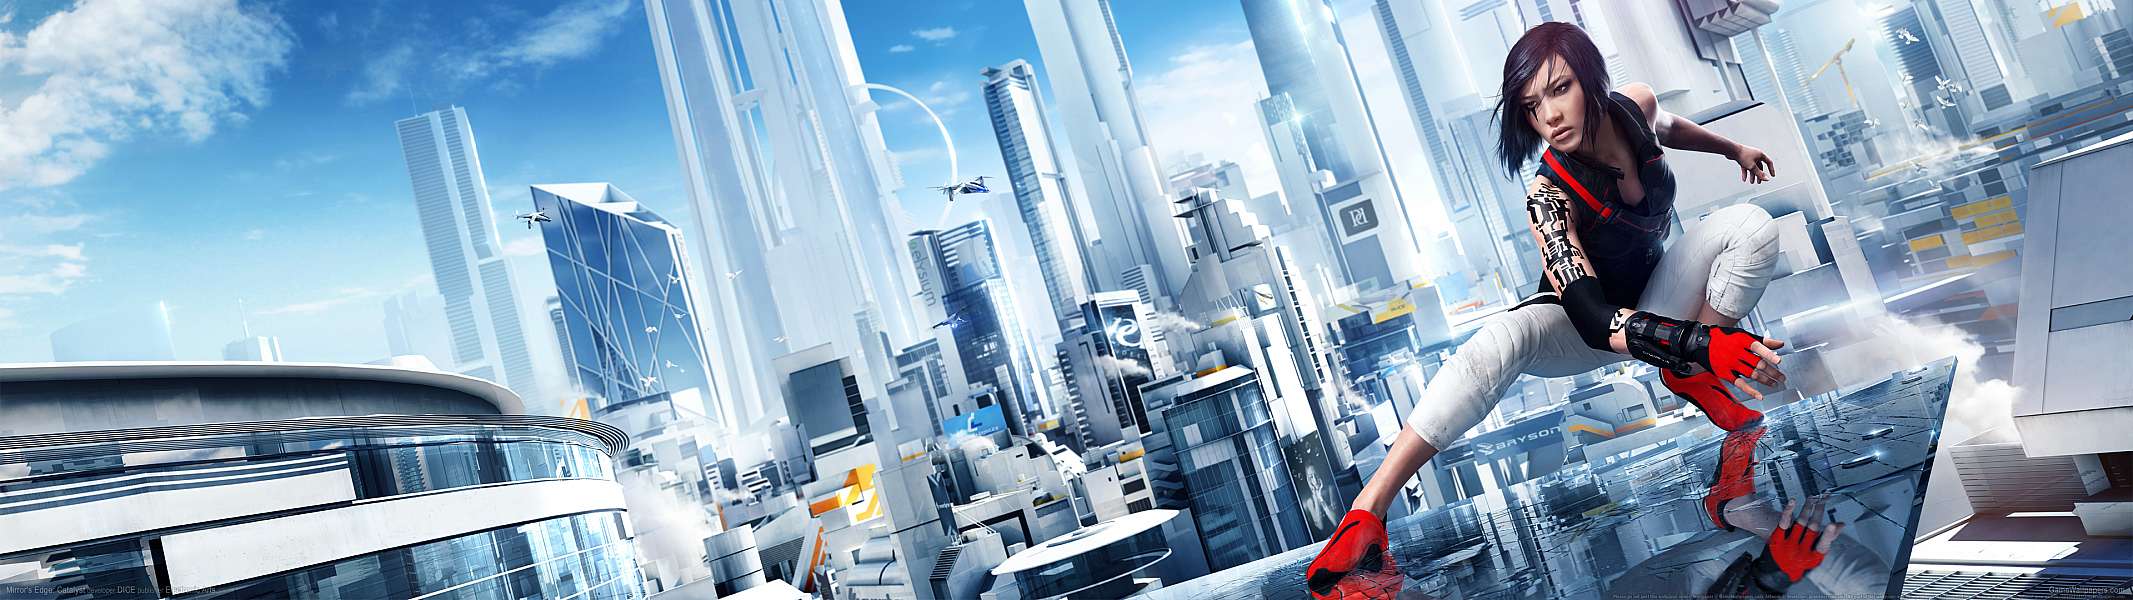 Mirror's Edge: Catalyst dual screen wallpaper or background